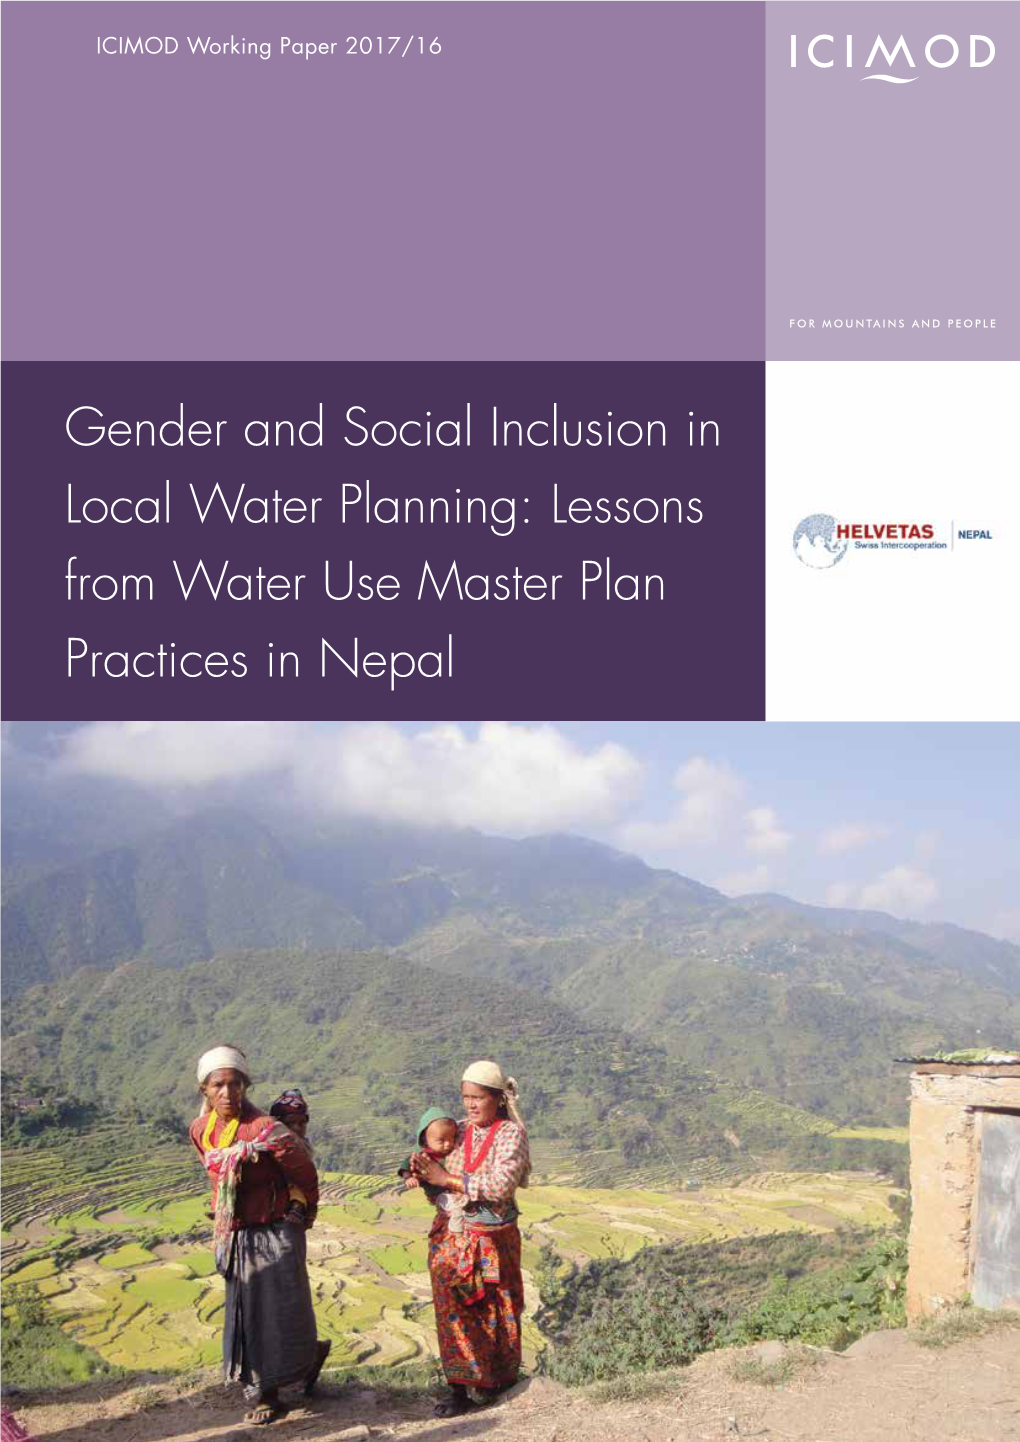 Gender and Social Inclusion in Local Water Planning: Lessons from Water Use Master Plan Practices in Nepal